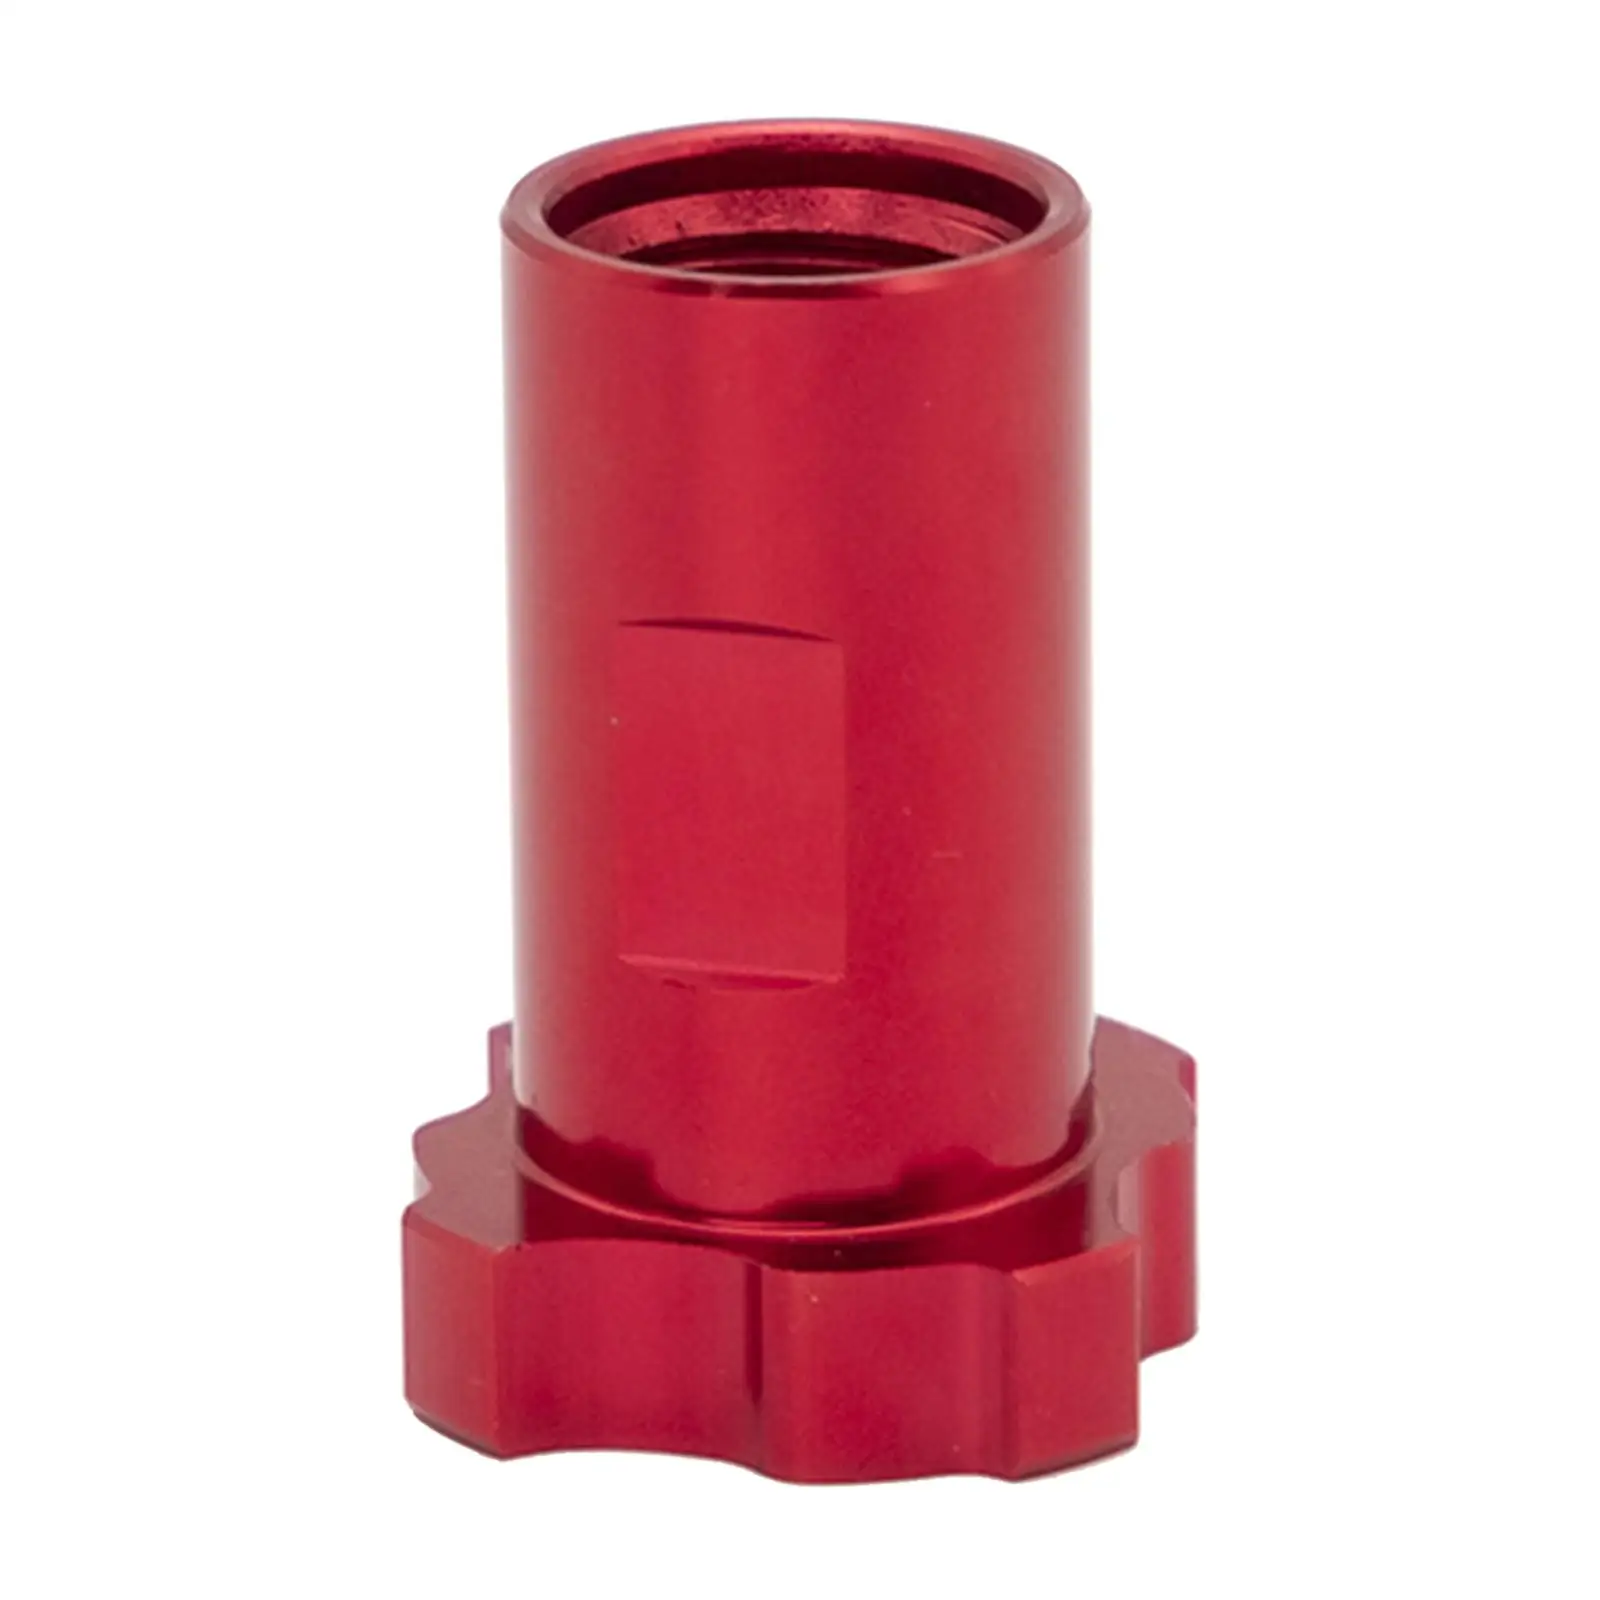 Spray Cup Adapter Outlet Red Spray Connector Adapter for Spray Disposable Measuring Cup